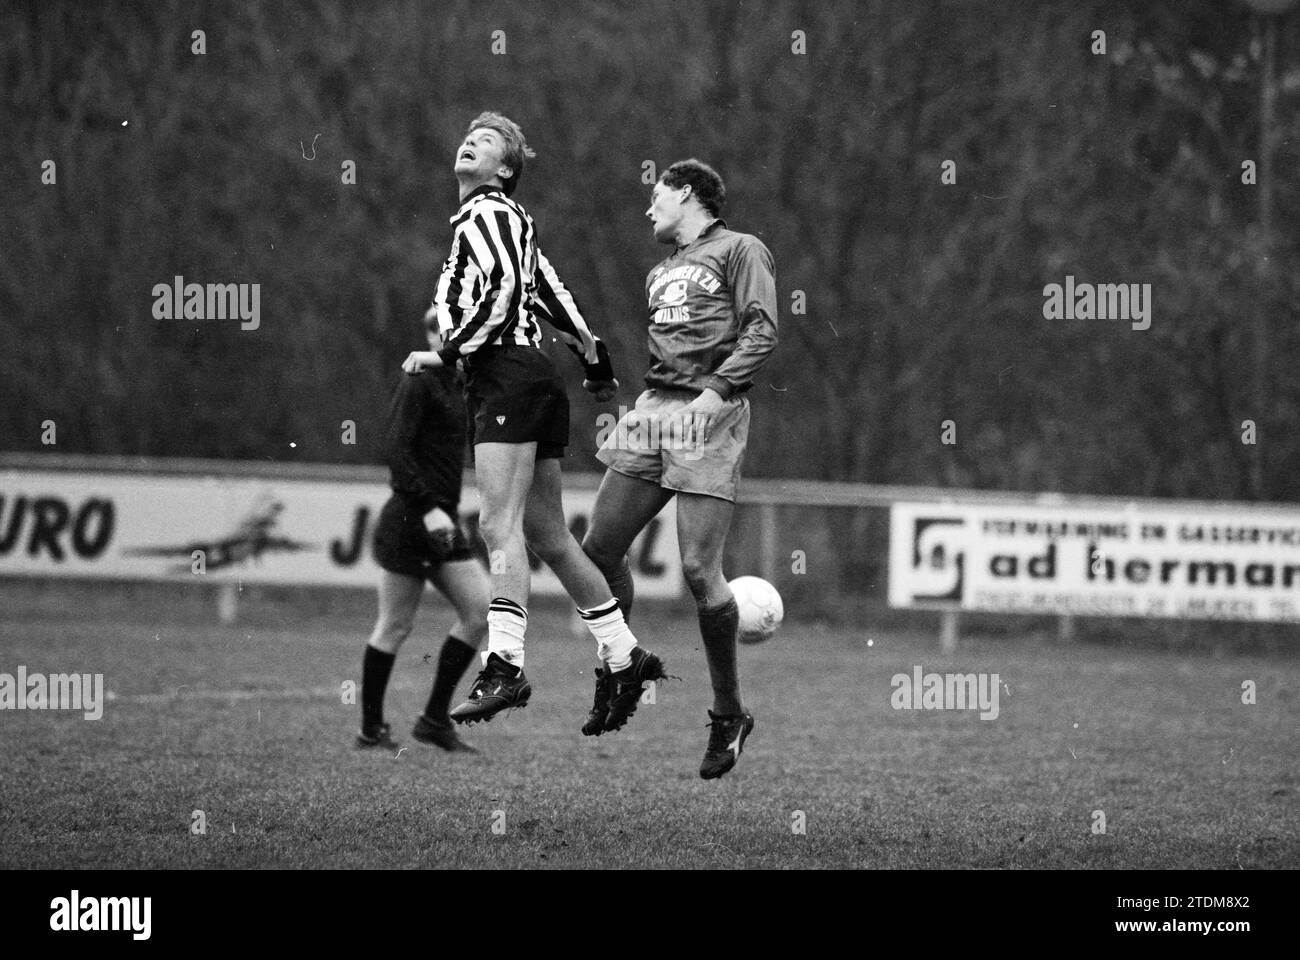 Football, IJmuiden - C.S.W., 23-11-1990, Whizgle News from the Past, Tailored for the Future. Explore historical narratives, Dutch The Netherlands agency image with a modern perspective, bridging the gap between yesterday's events and tomorrow's insights. A timeless journey shaping the stories that shape our future Stock Photo